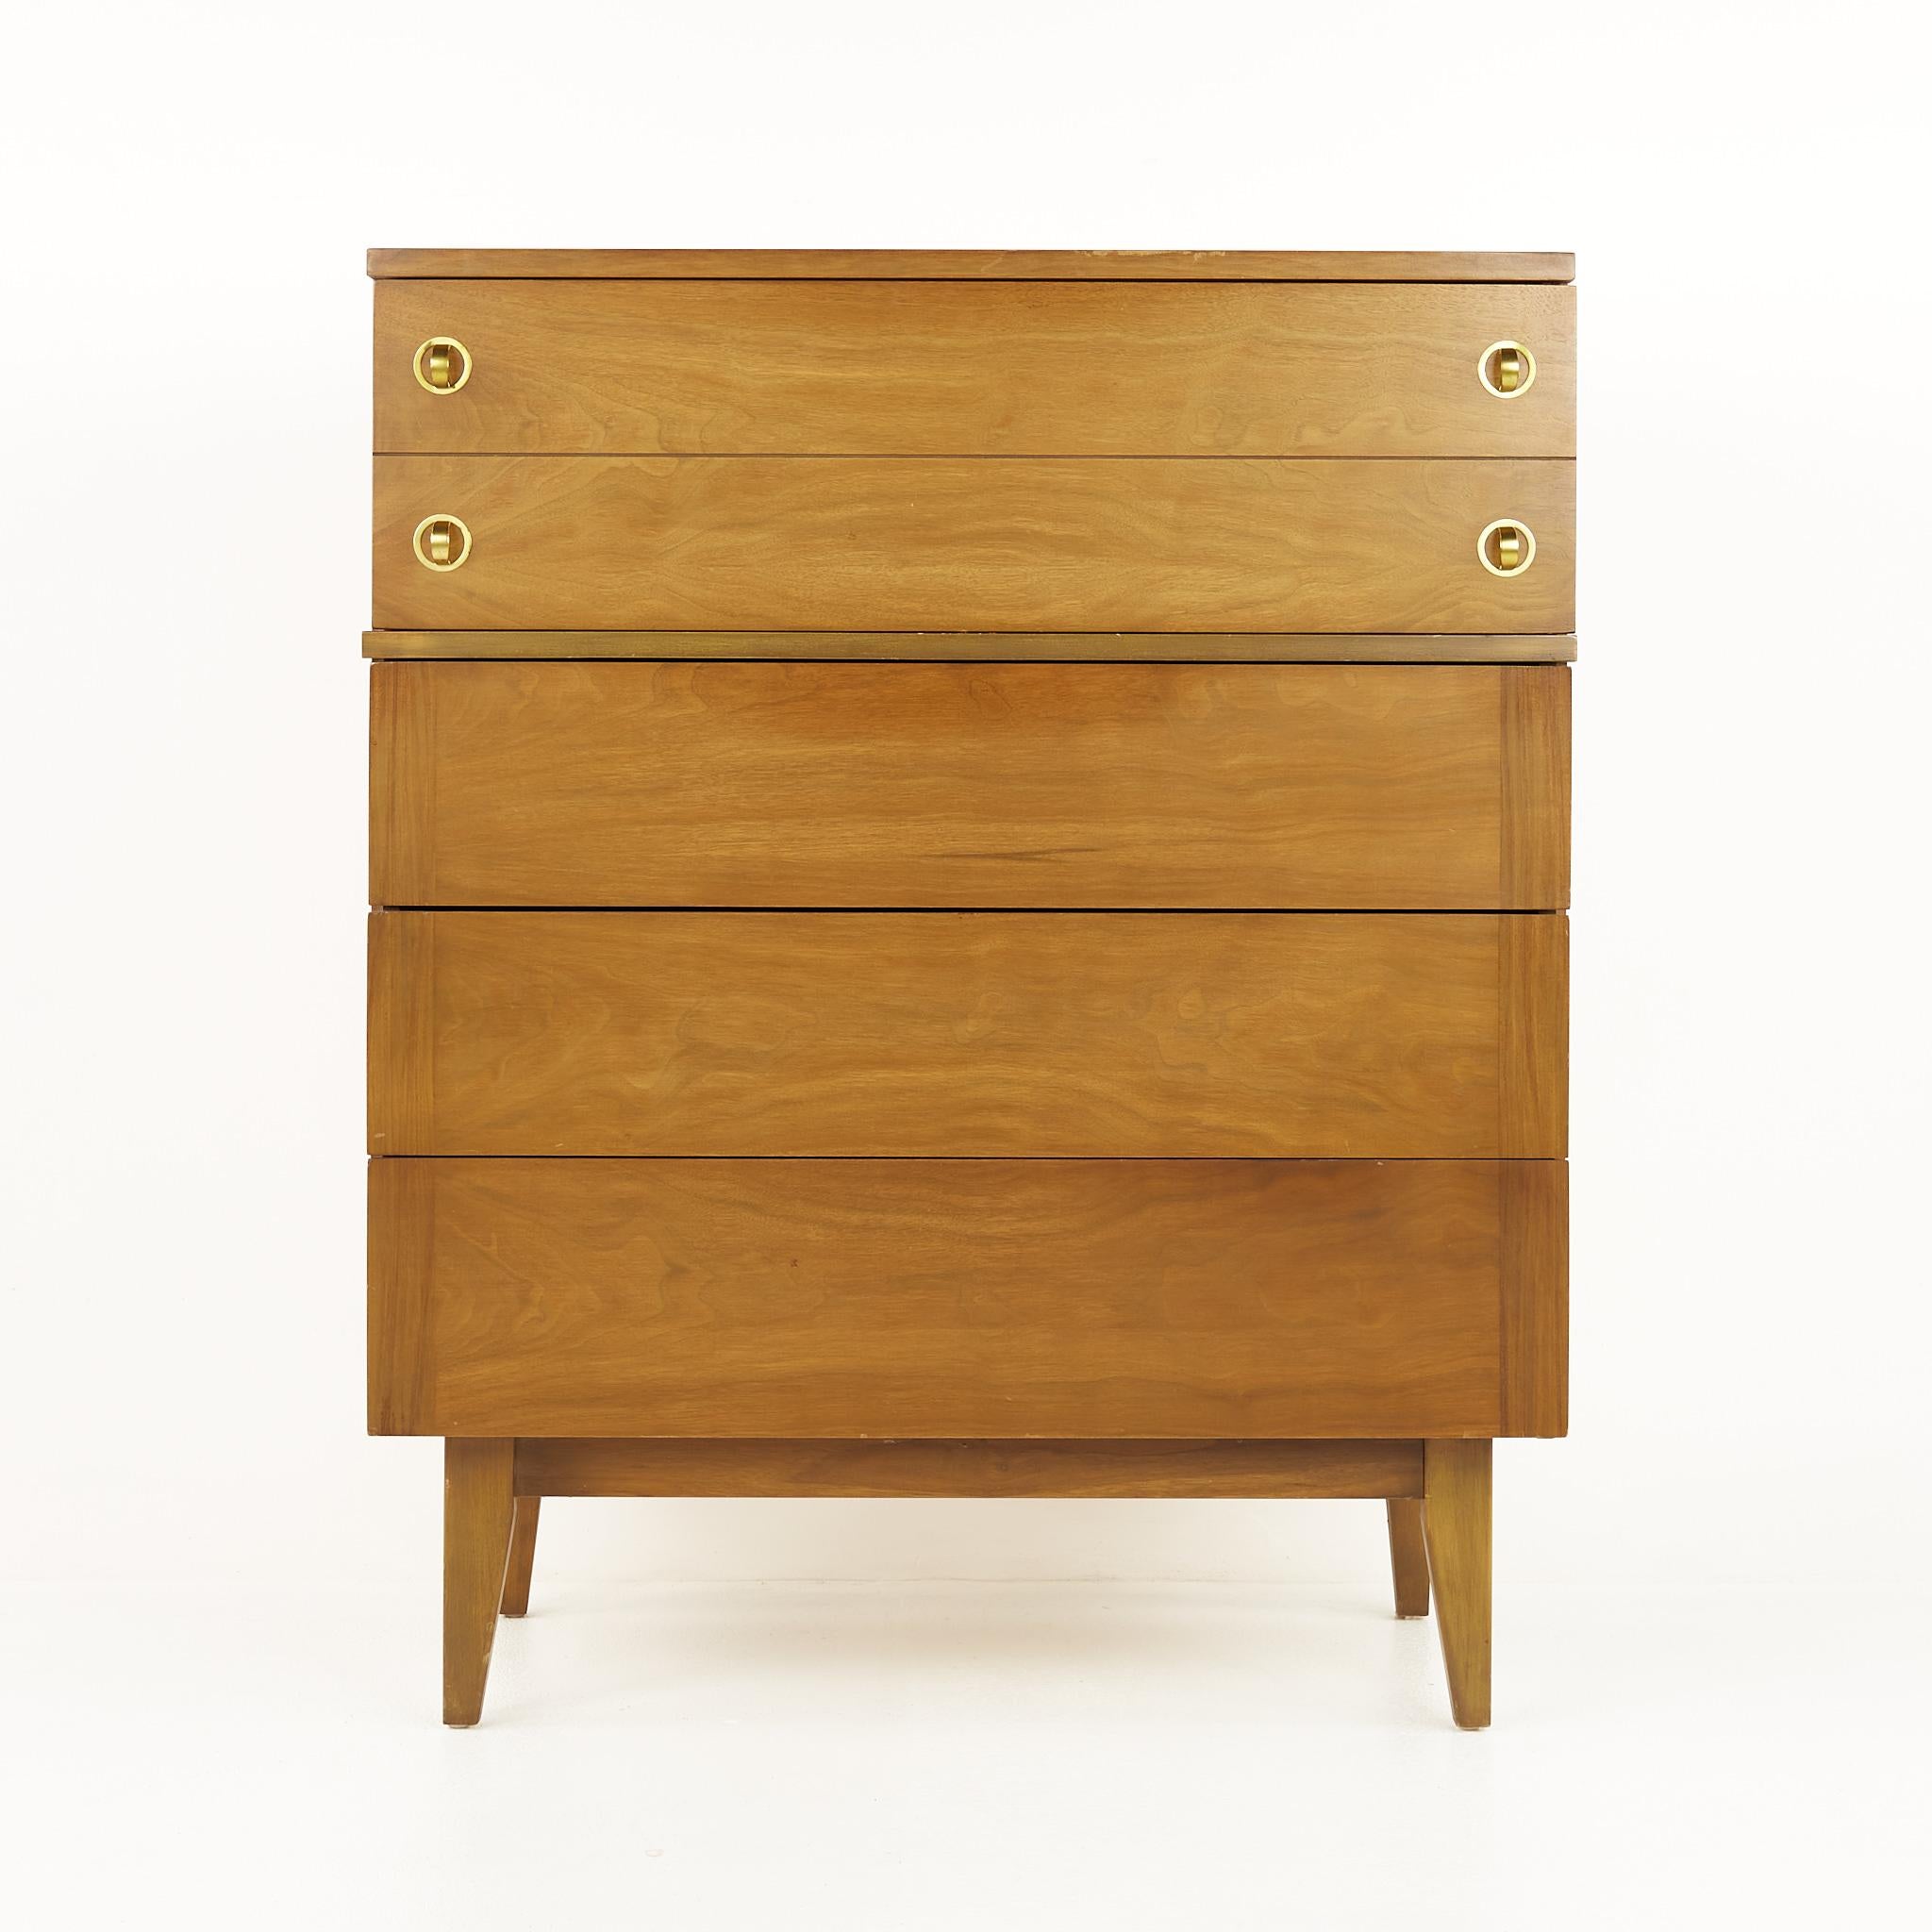 Stanley mid century walnut and brass 5 drawer highboy dresser

This dresser measures: 34 wide x 18.25 deep x 42.25 inches high

All pieces of furniture can be had in what we call restored vintage condition. That means the piece is restored upon